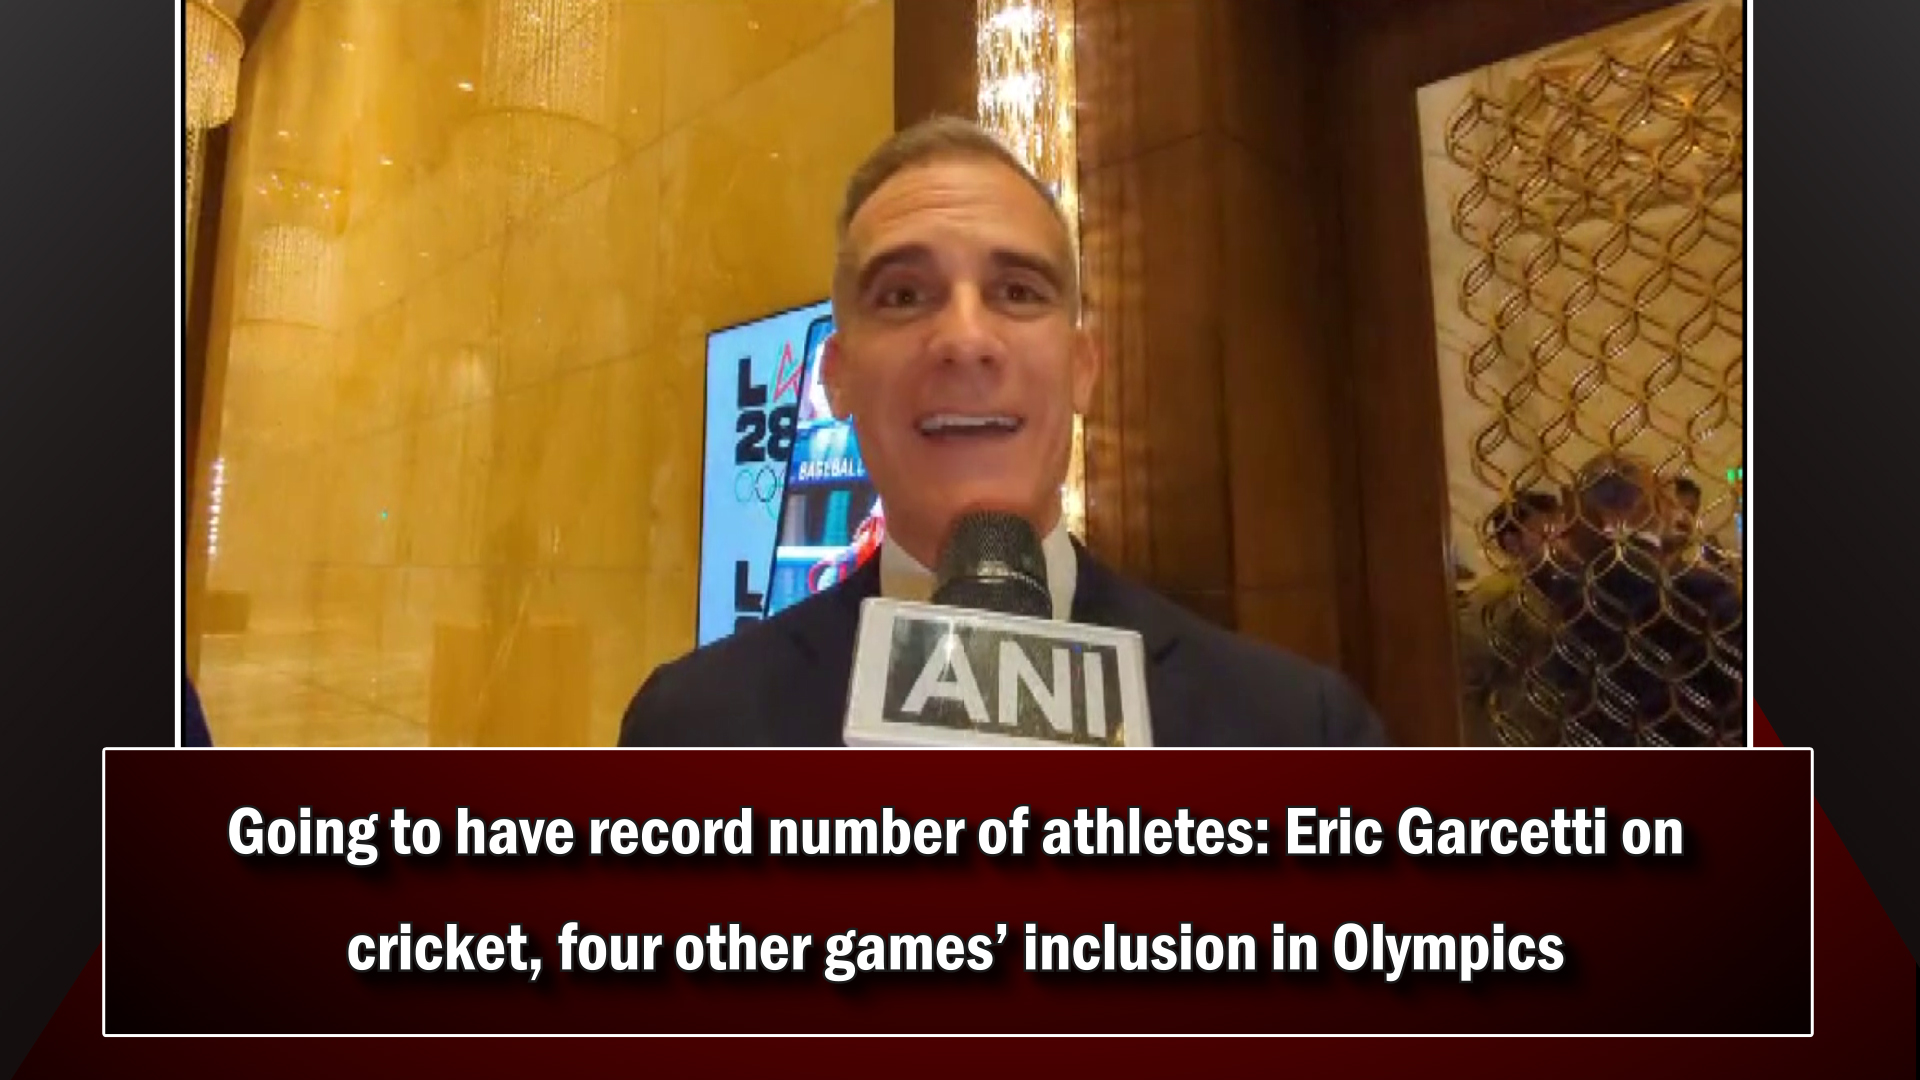 Going to have record number of athletes: Eric Garcetti on cricket, four other games` inclusion in Olympics